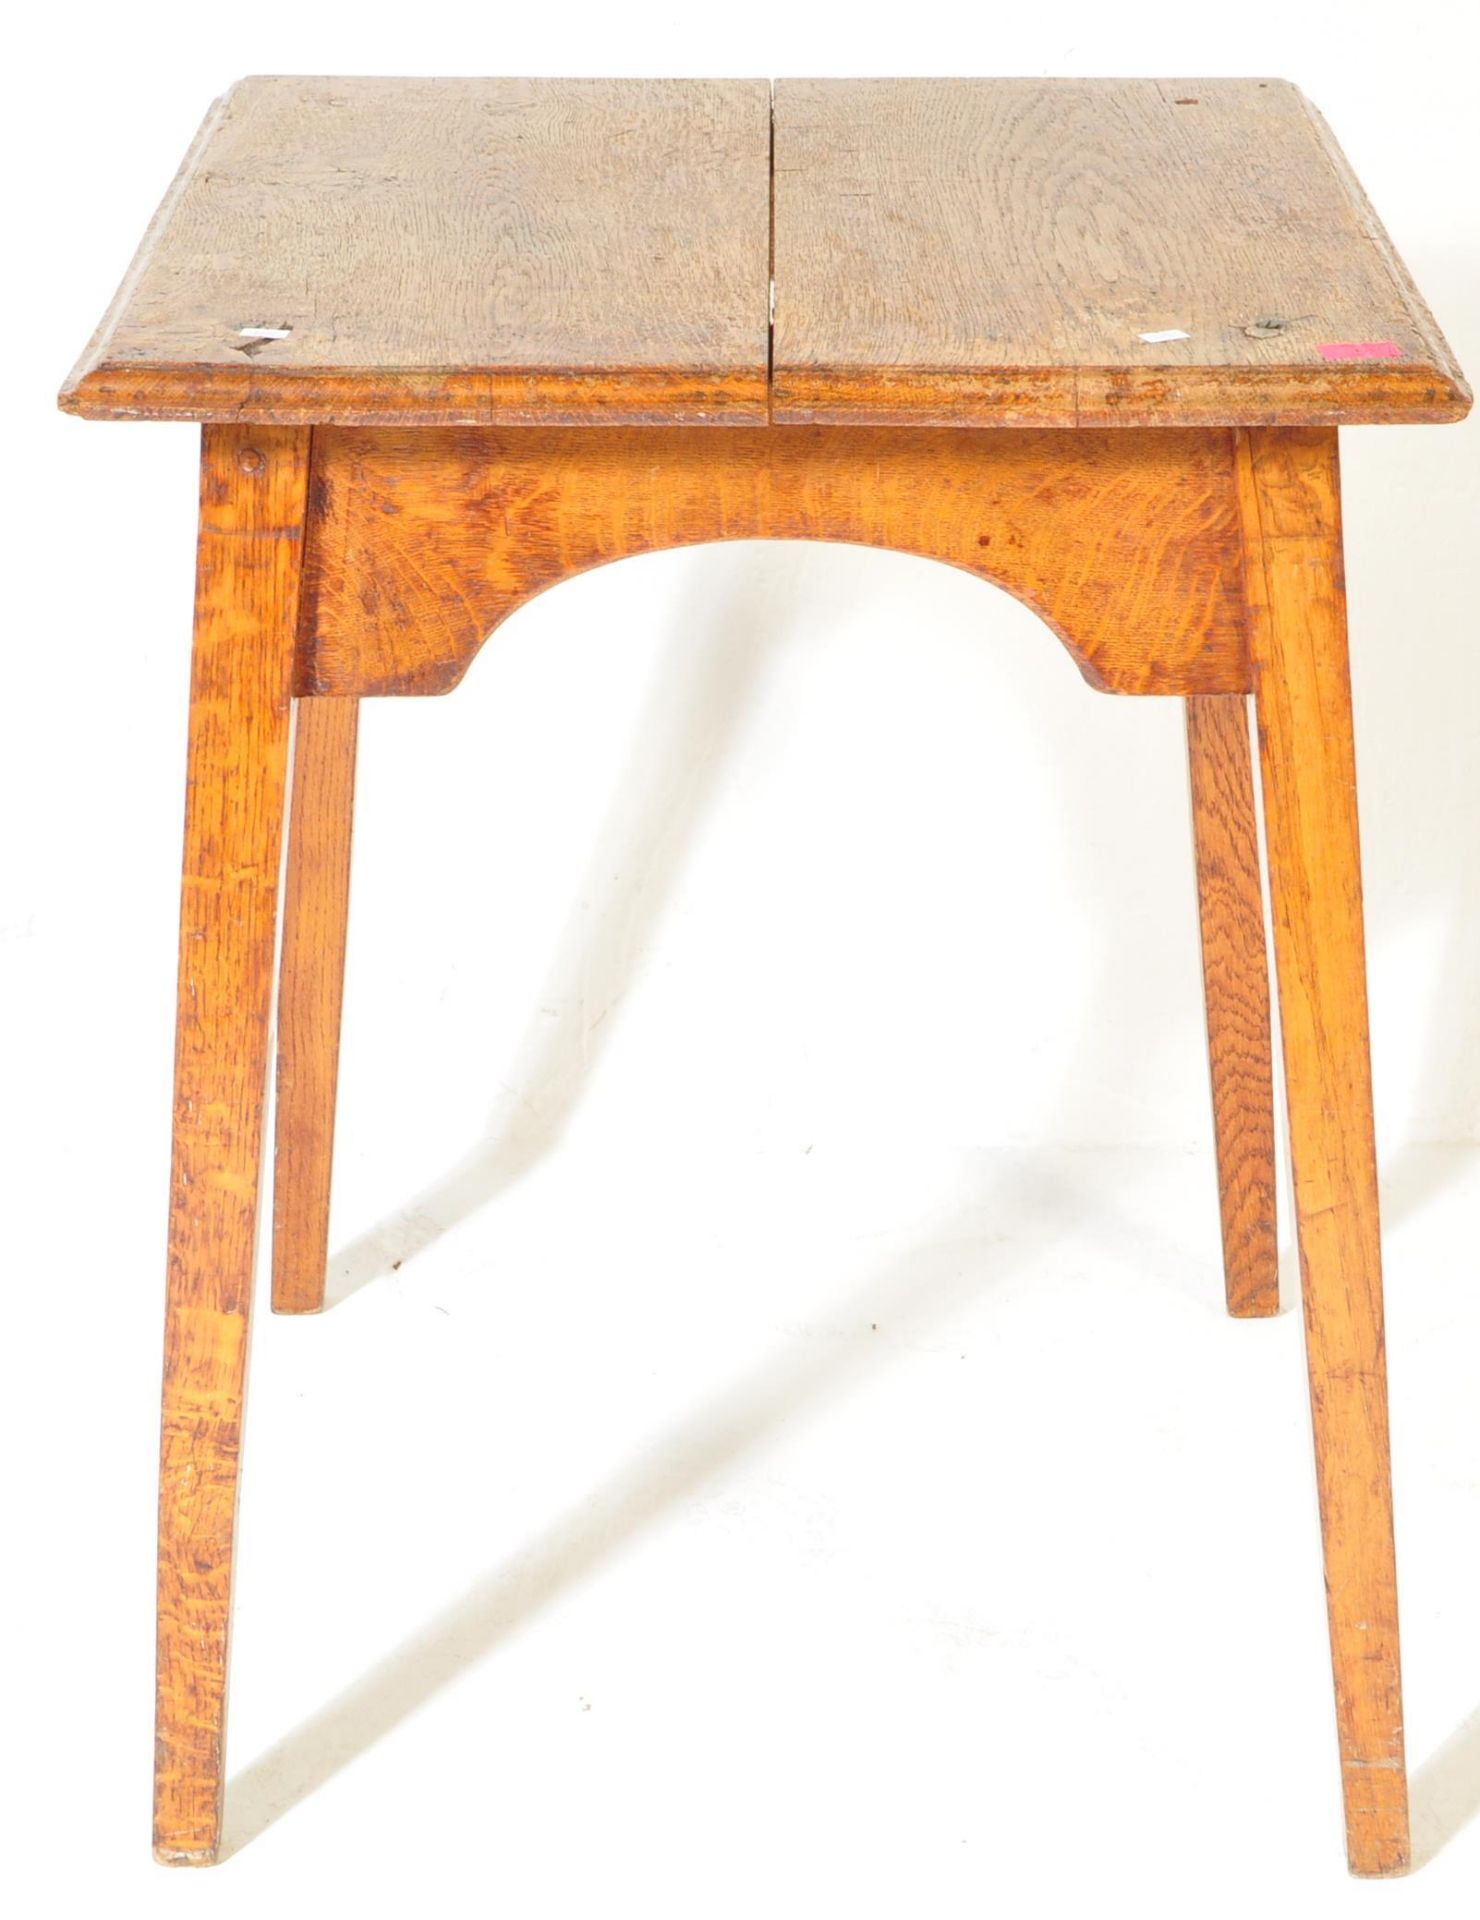 VICTORIAN ARTS & CRAFTS OAK SQUARED CHURCH TABLE - Image 3 of 5